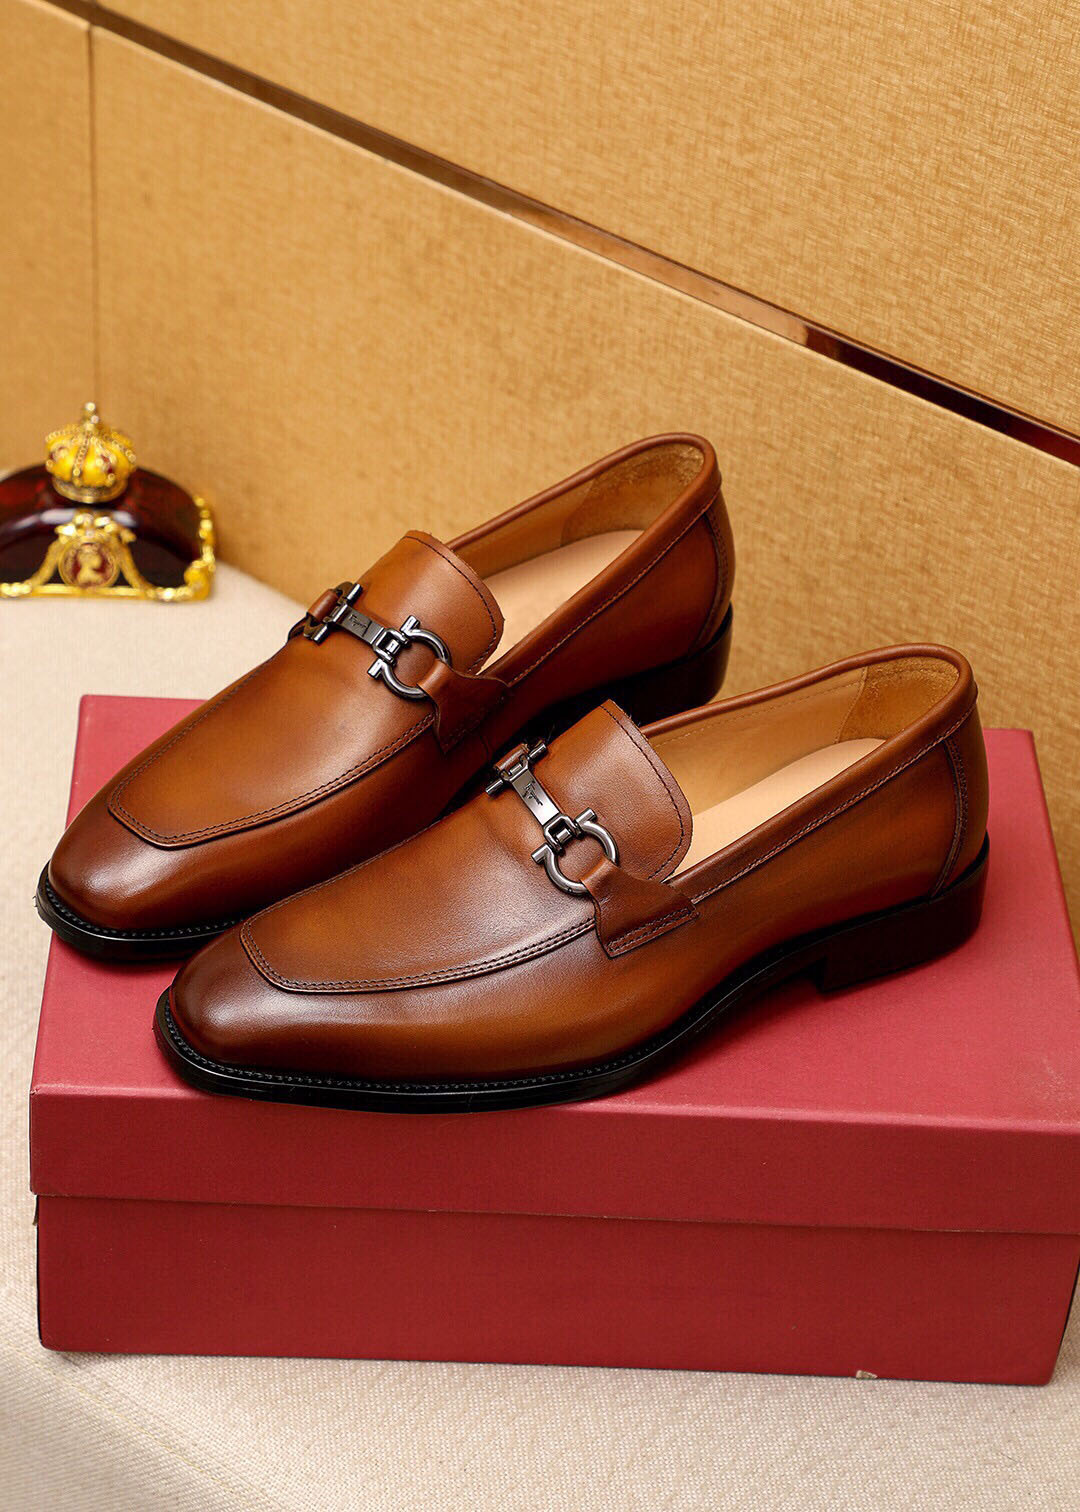 2023 Men Formal Business Brogue Dress Shoes Men's Casual Genuine Leather Flats Brand Designer Wedding Party Loafers Size 38-47